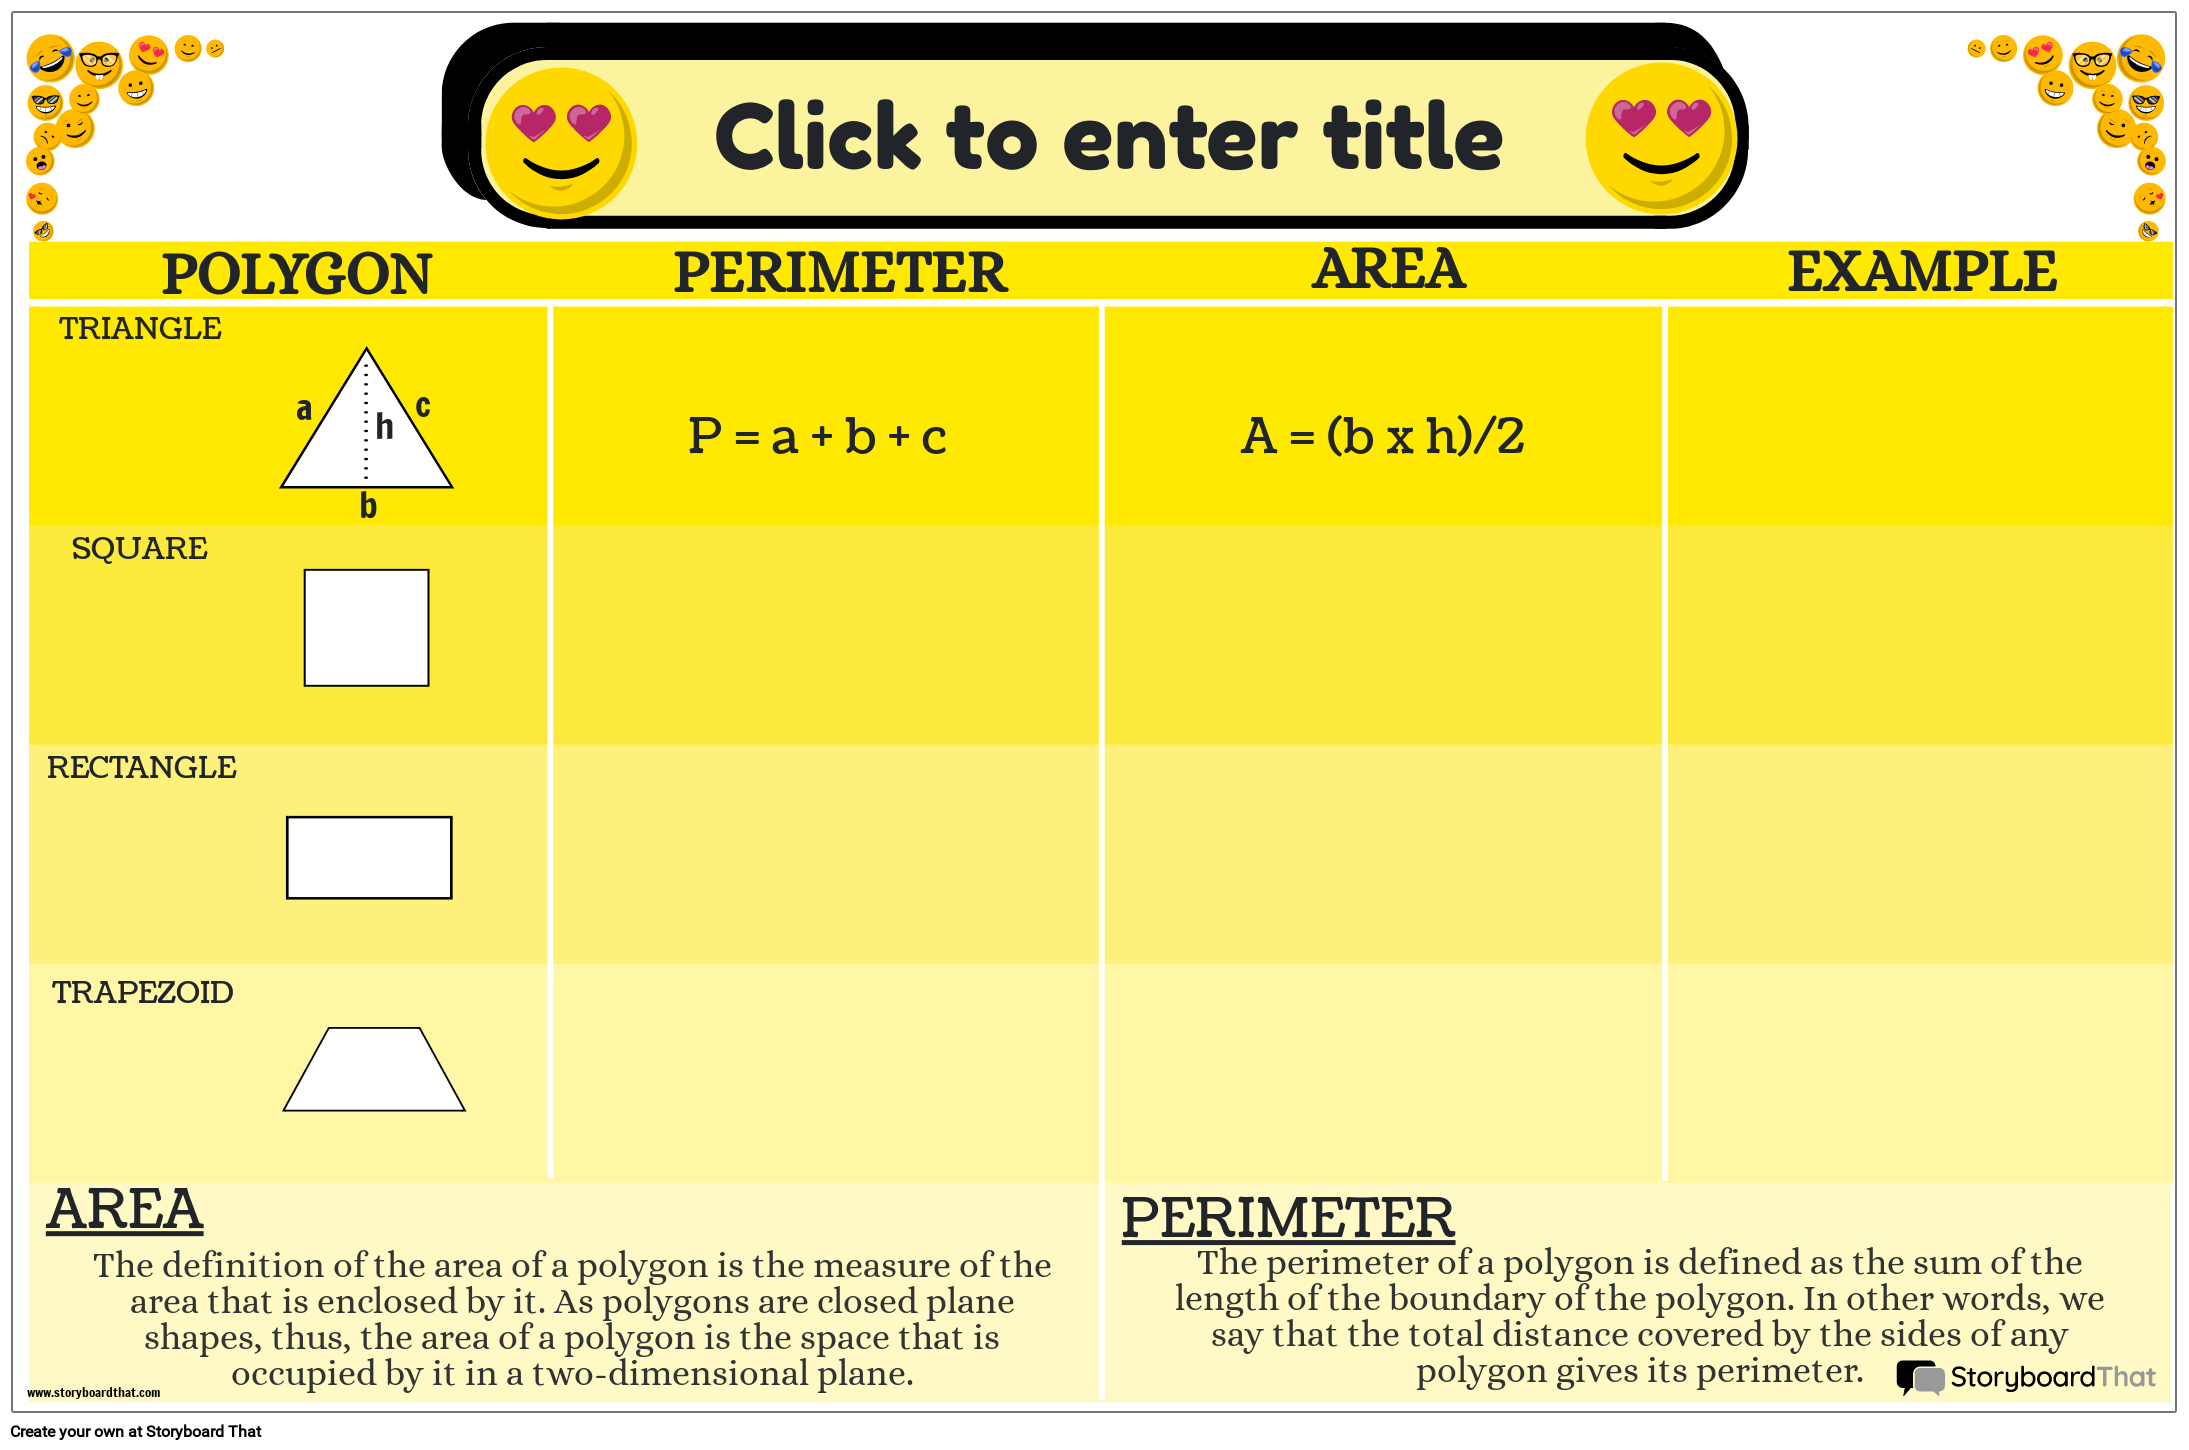 Emoji-themed Area and Perimeter Poster